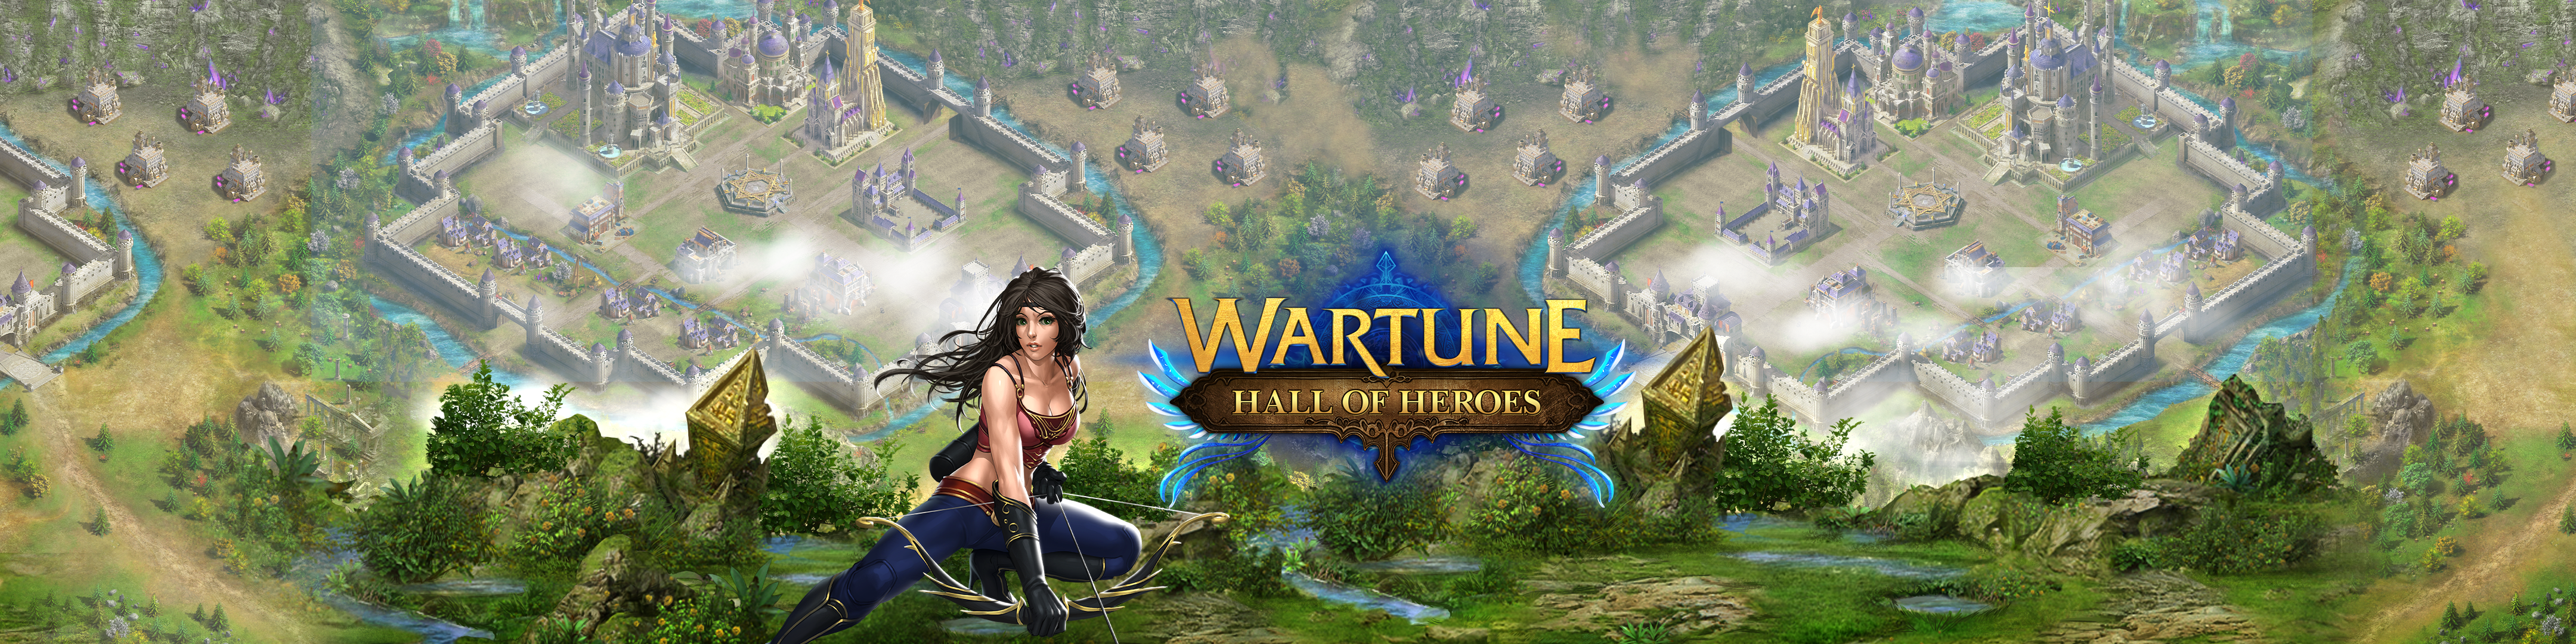 event code for wartune hall of heroes